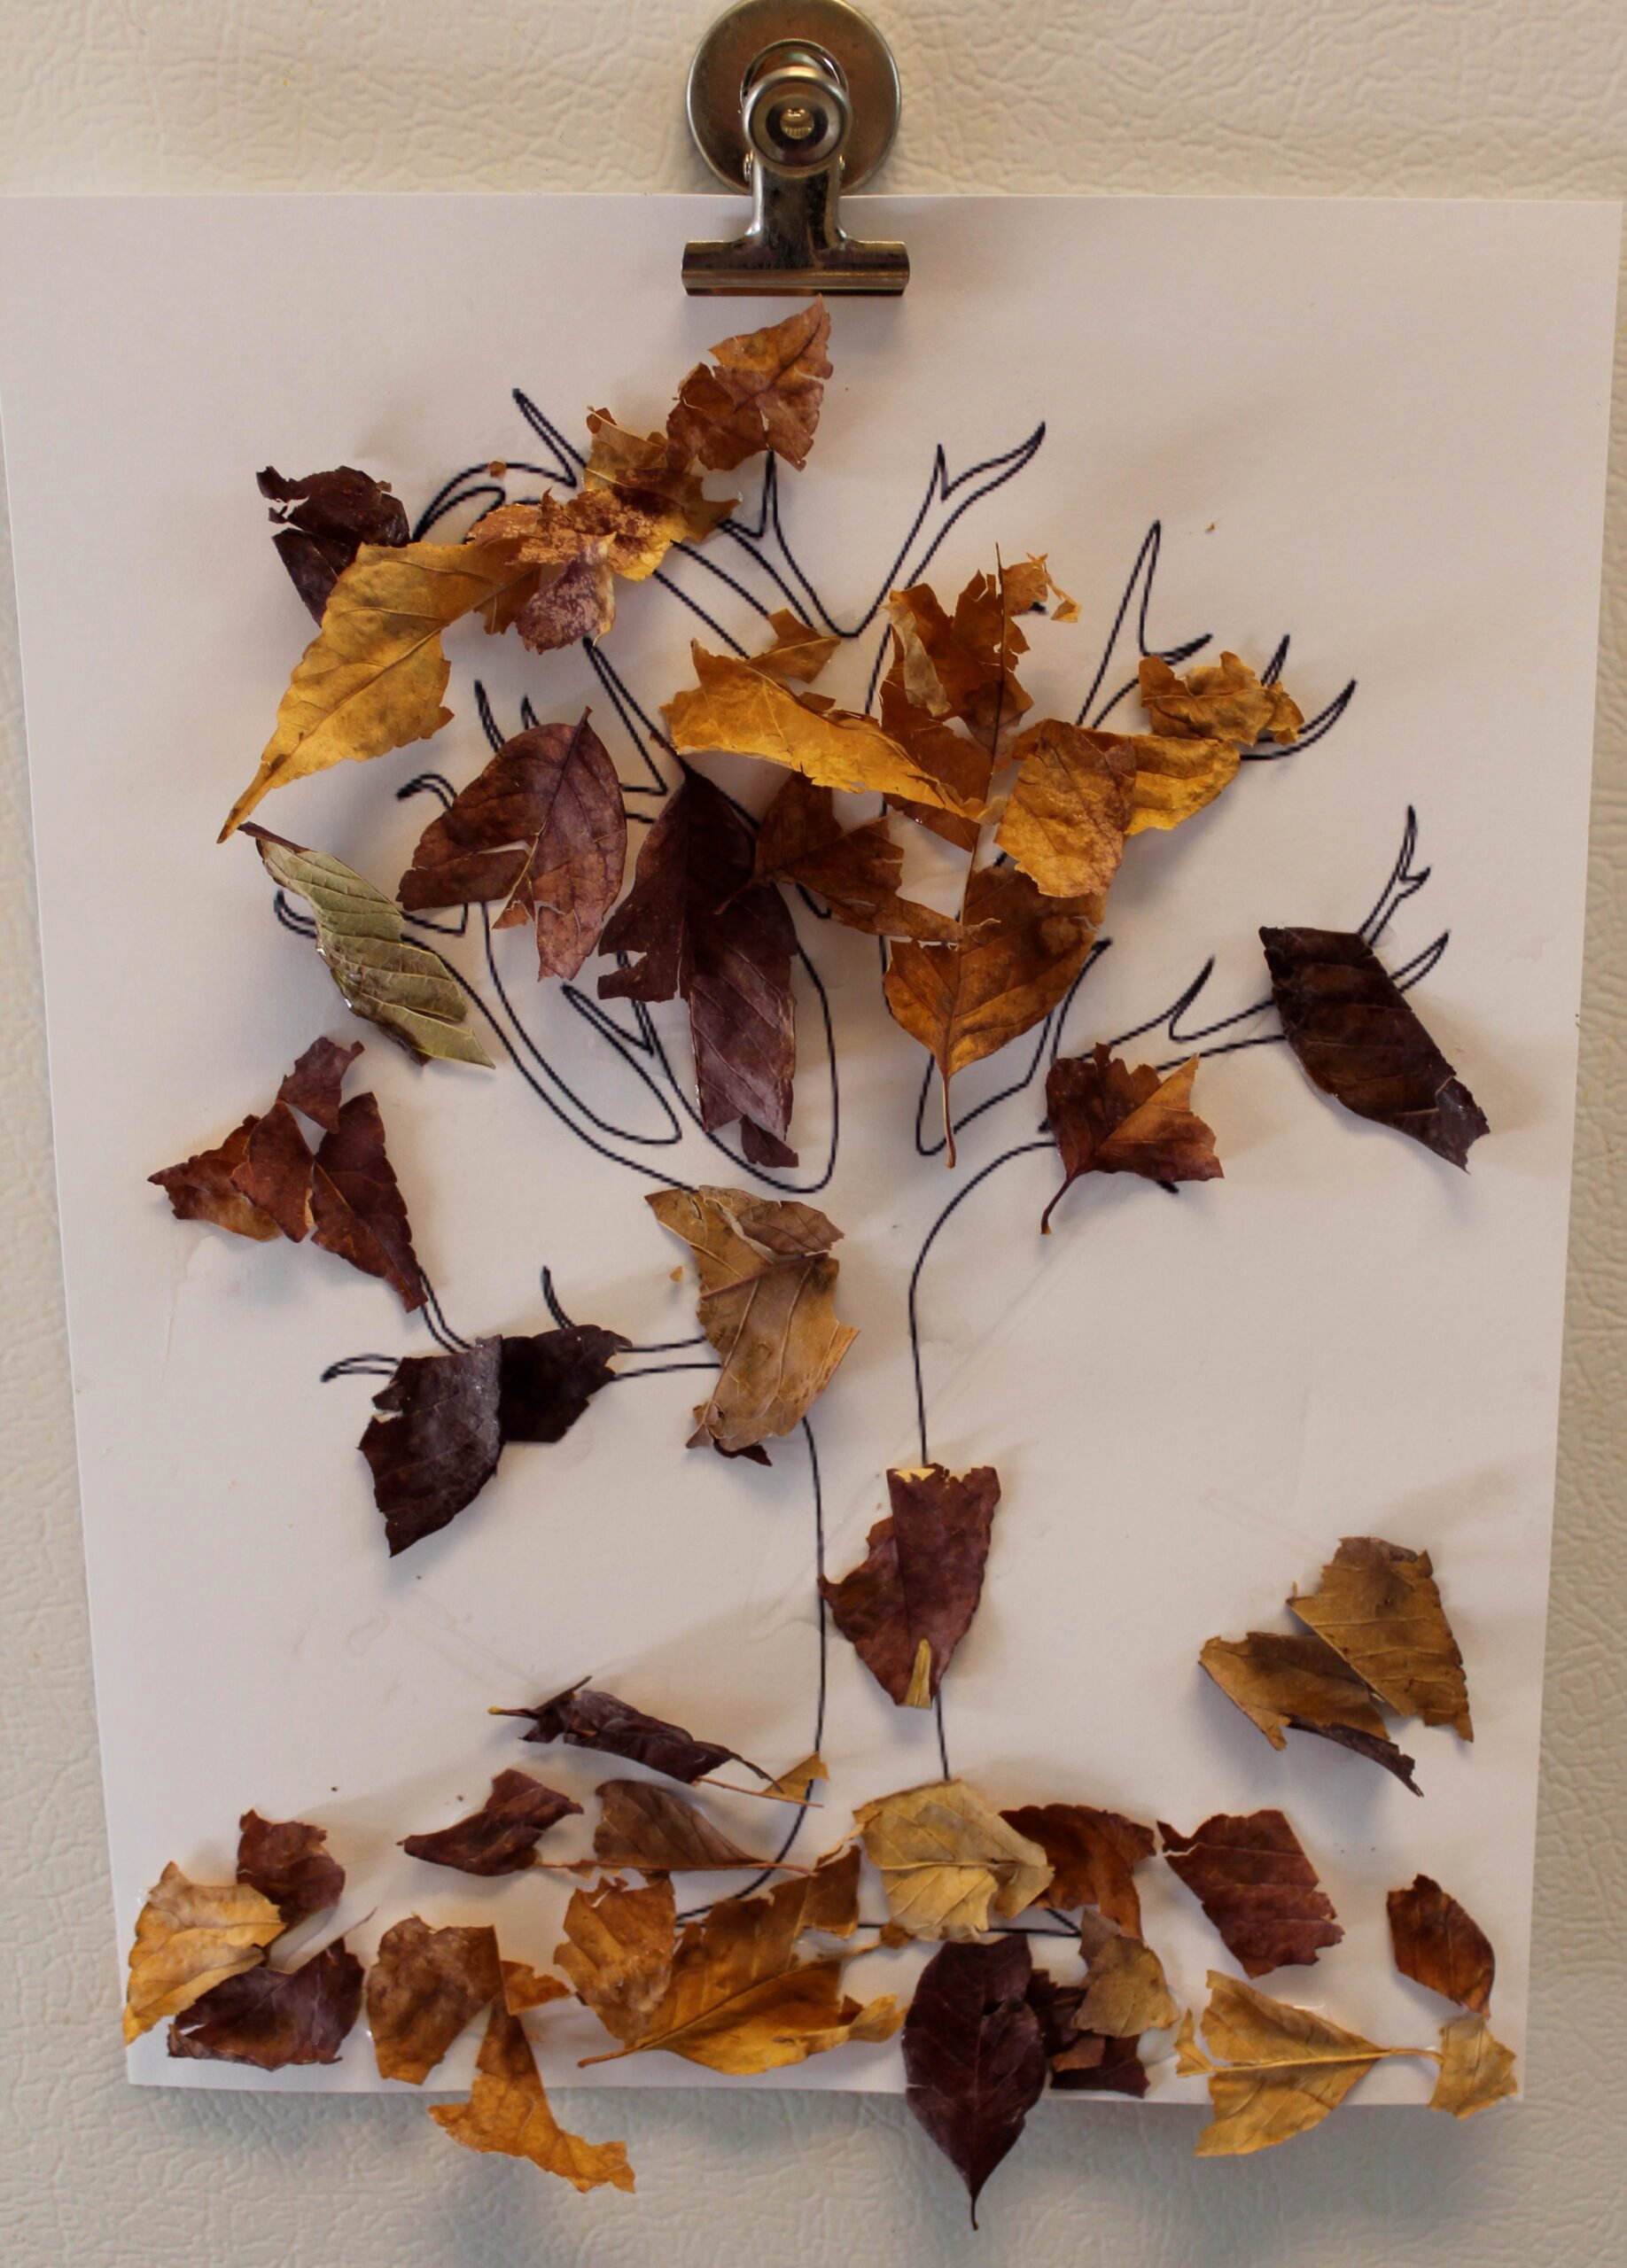 Crunched-Up Leaves Project